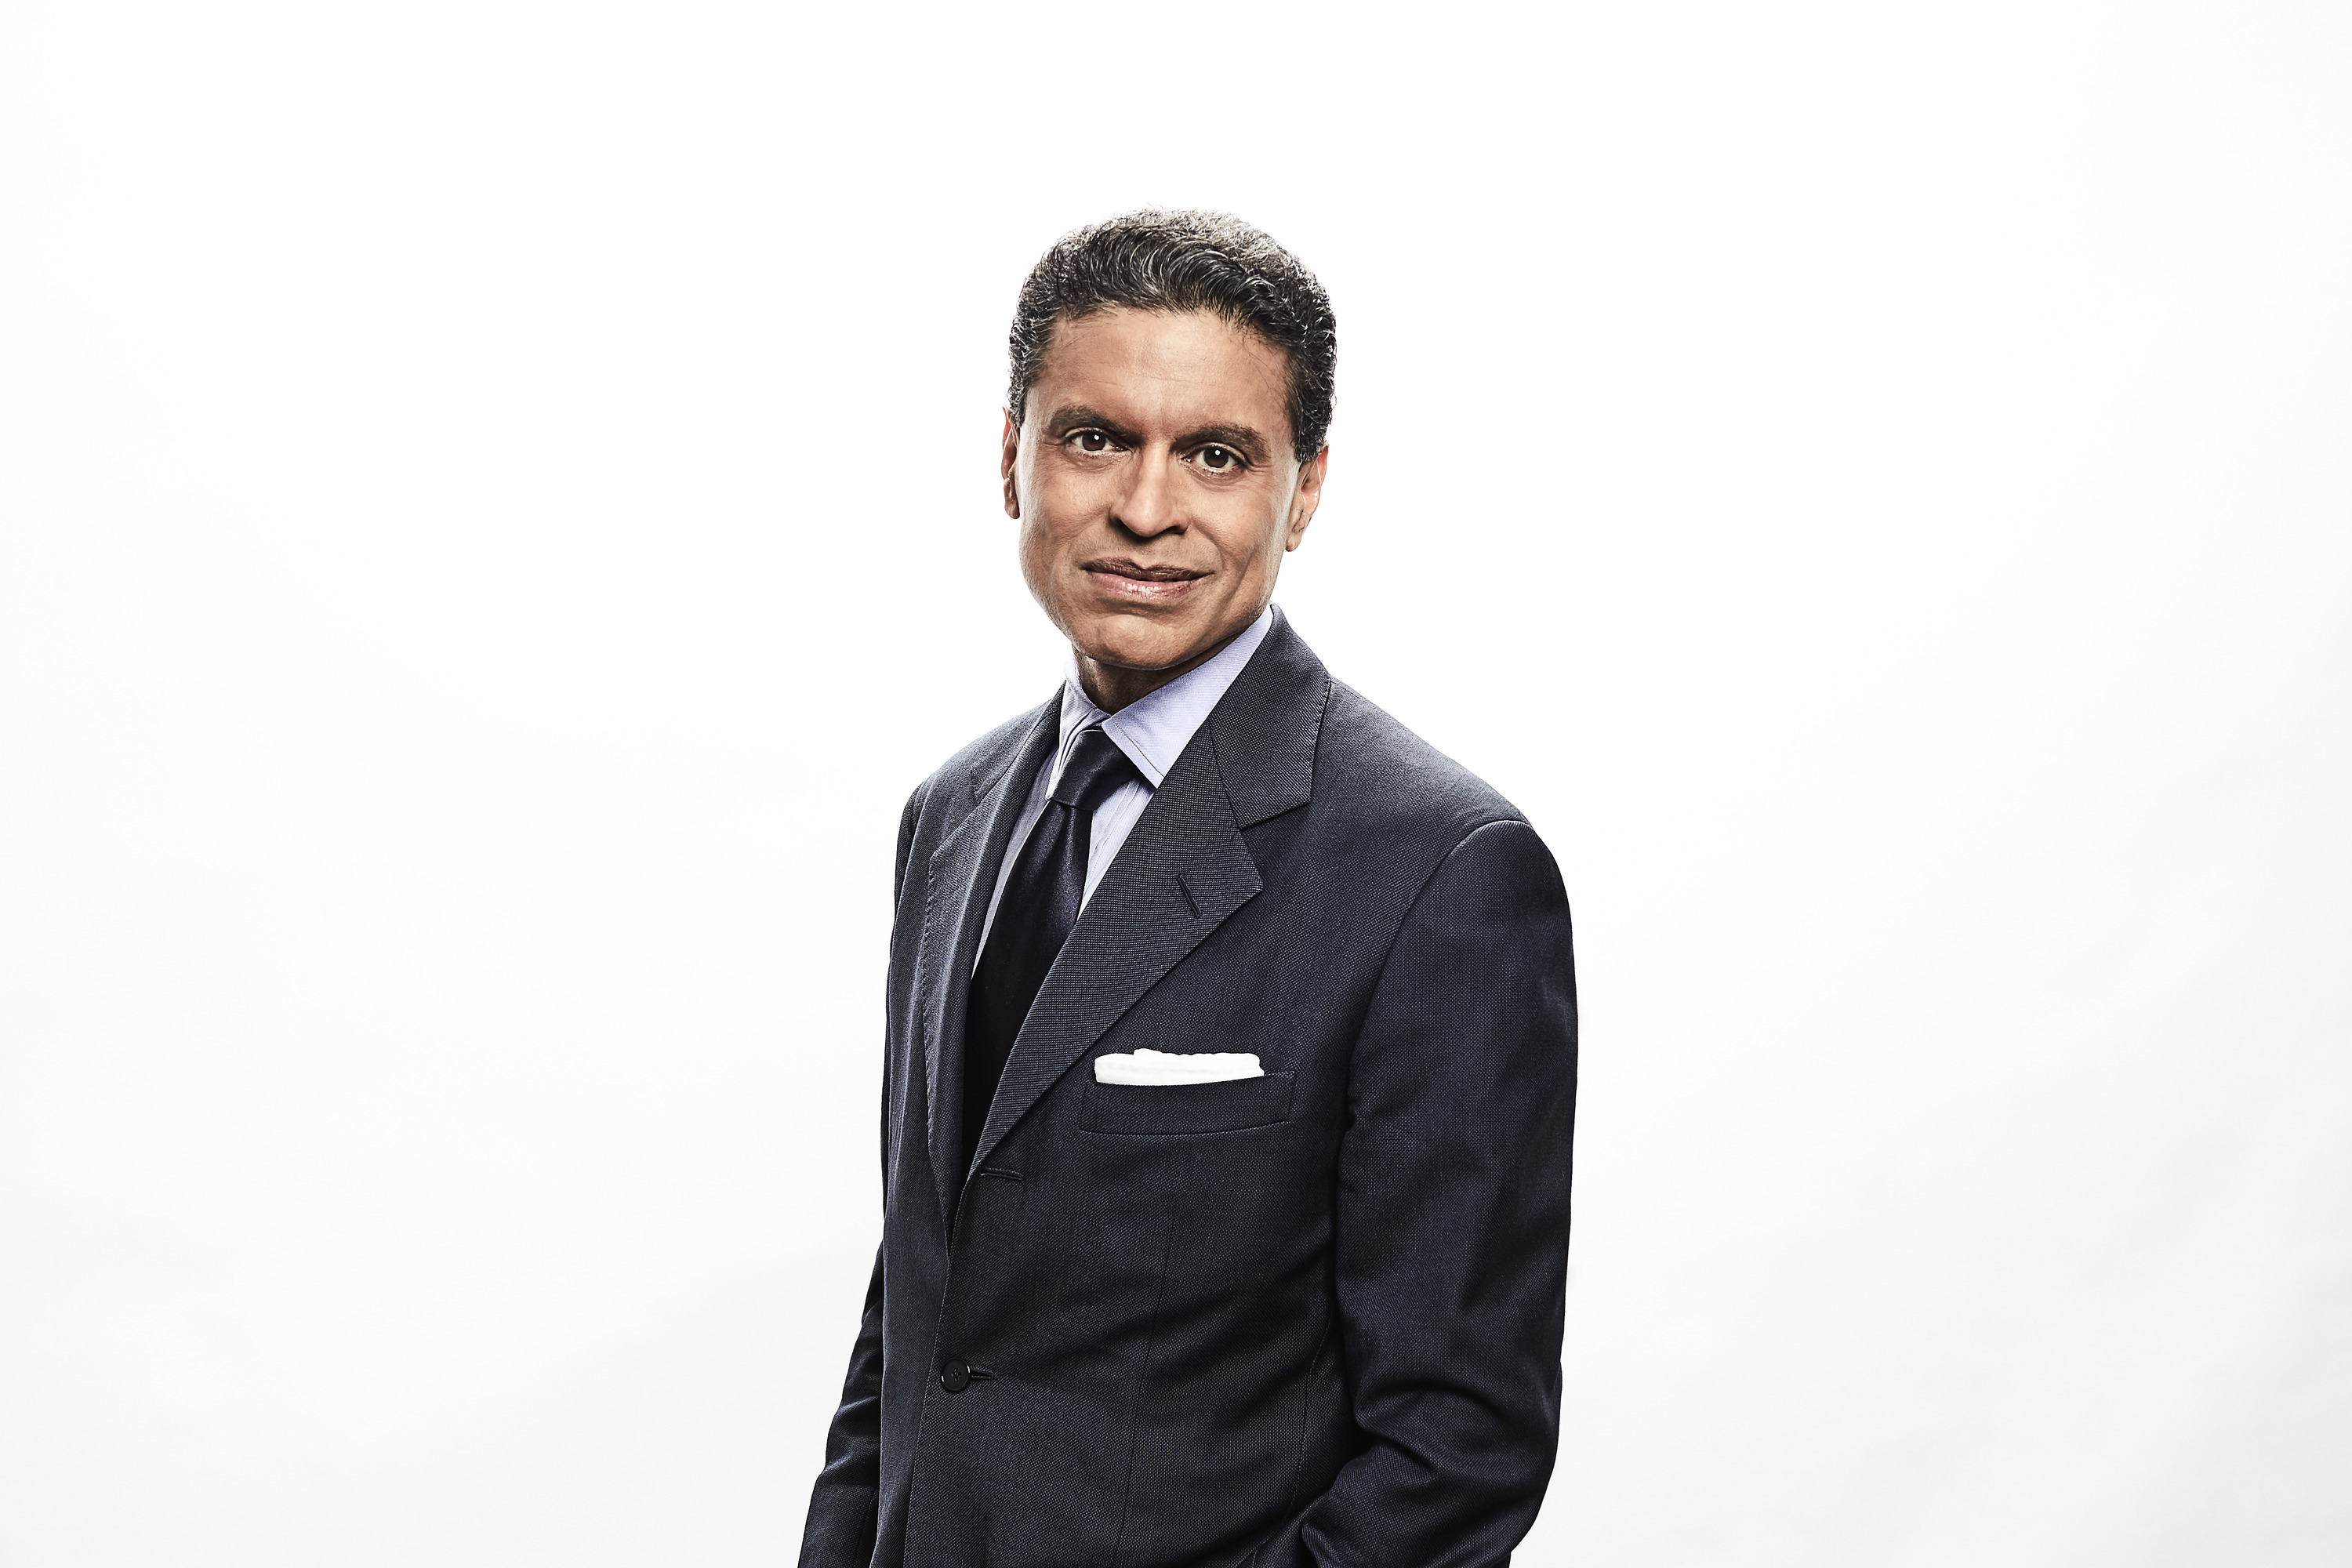 ‘THE MOST POWERFUL MAN IN THE WORLD’ Fareed Zakaria on the Rise